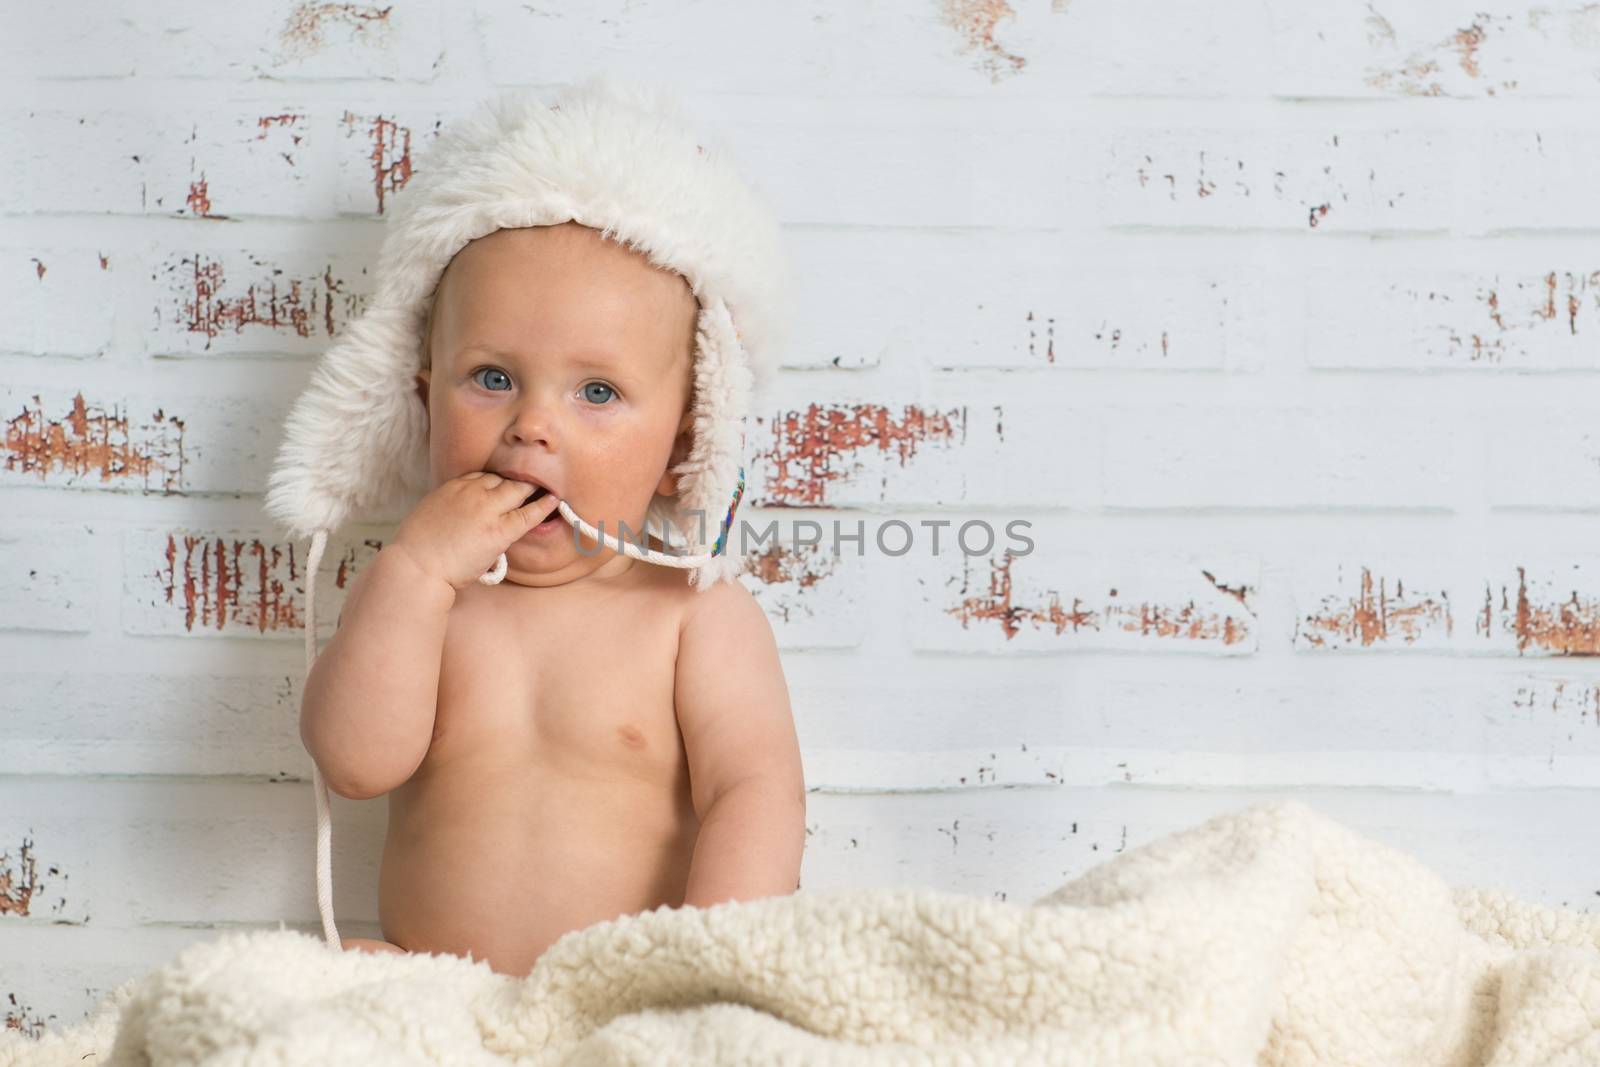 Naked baby girl sitting in a warm interior wearing white cap. Rustic wall in the back.